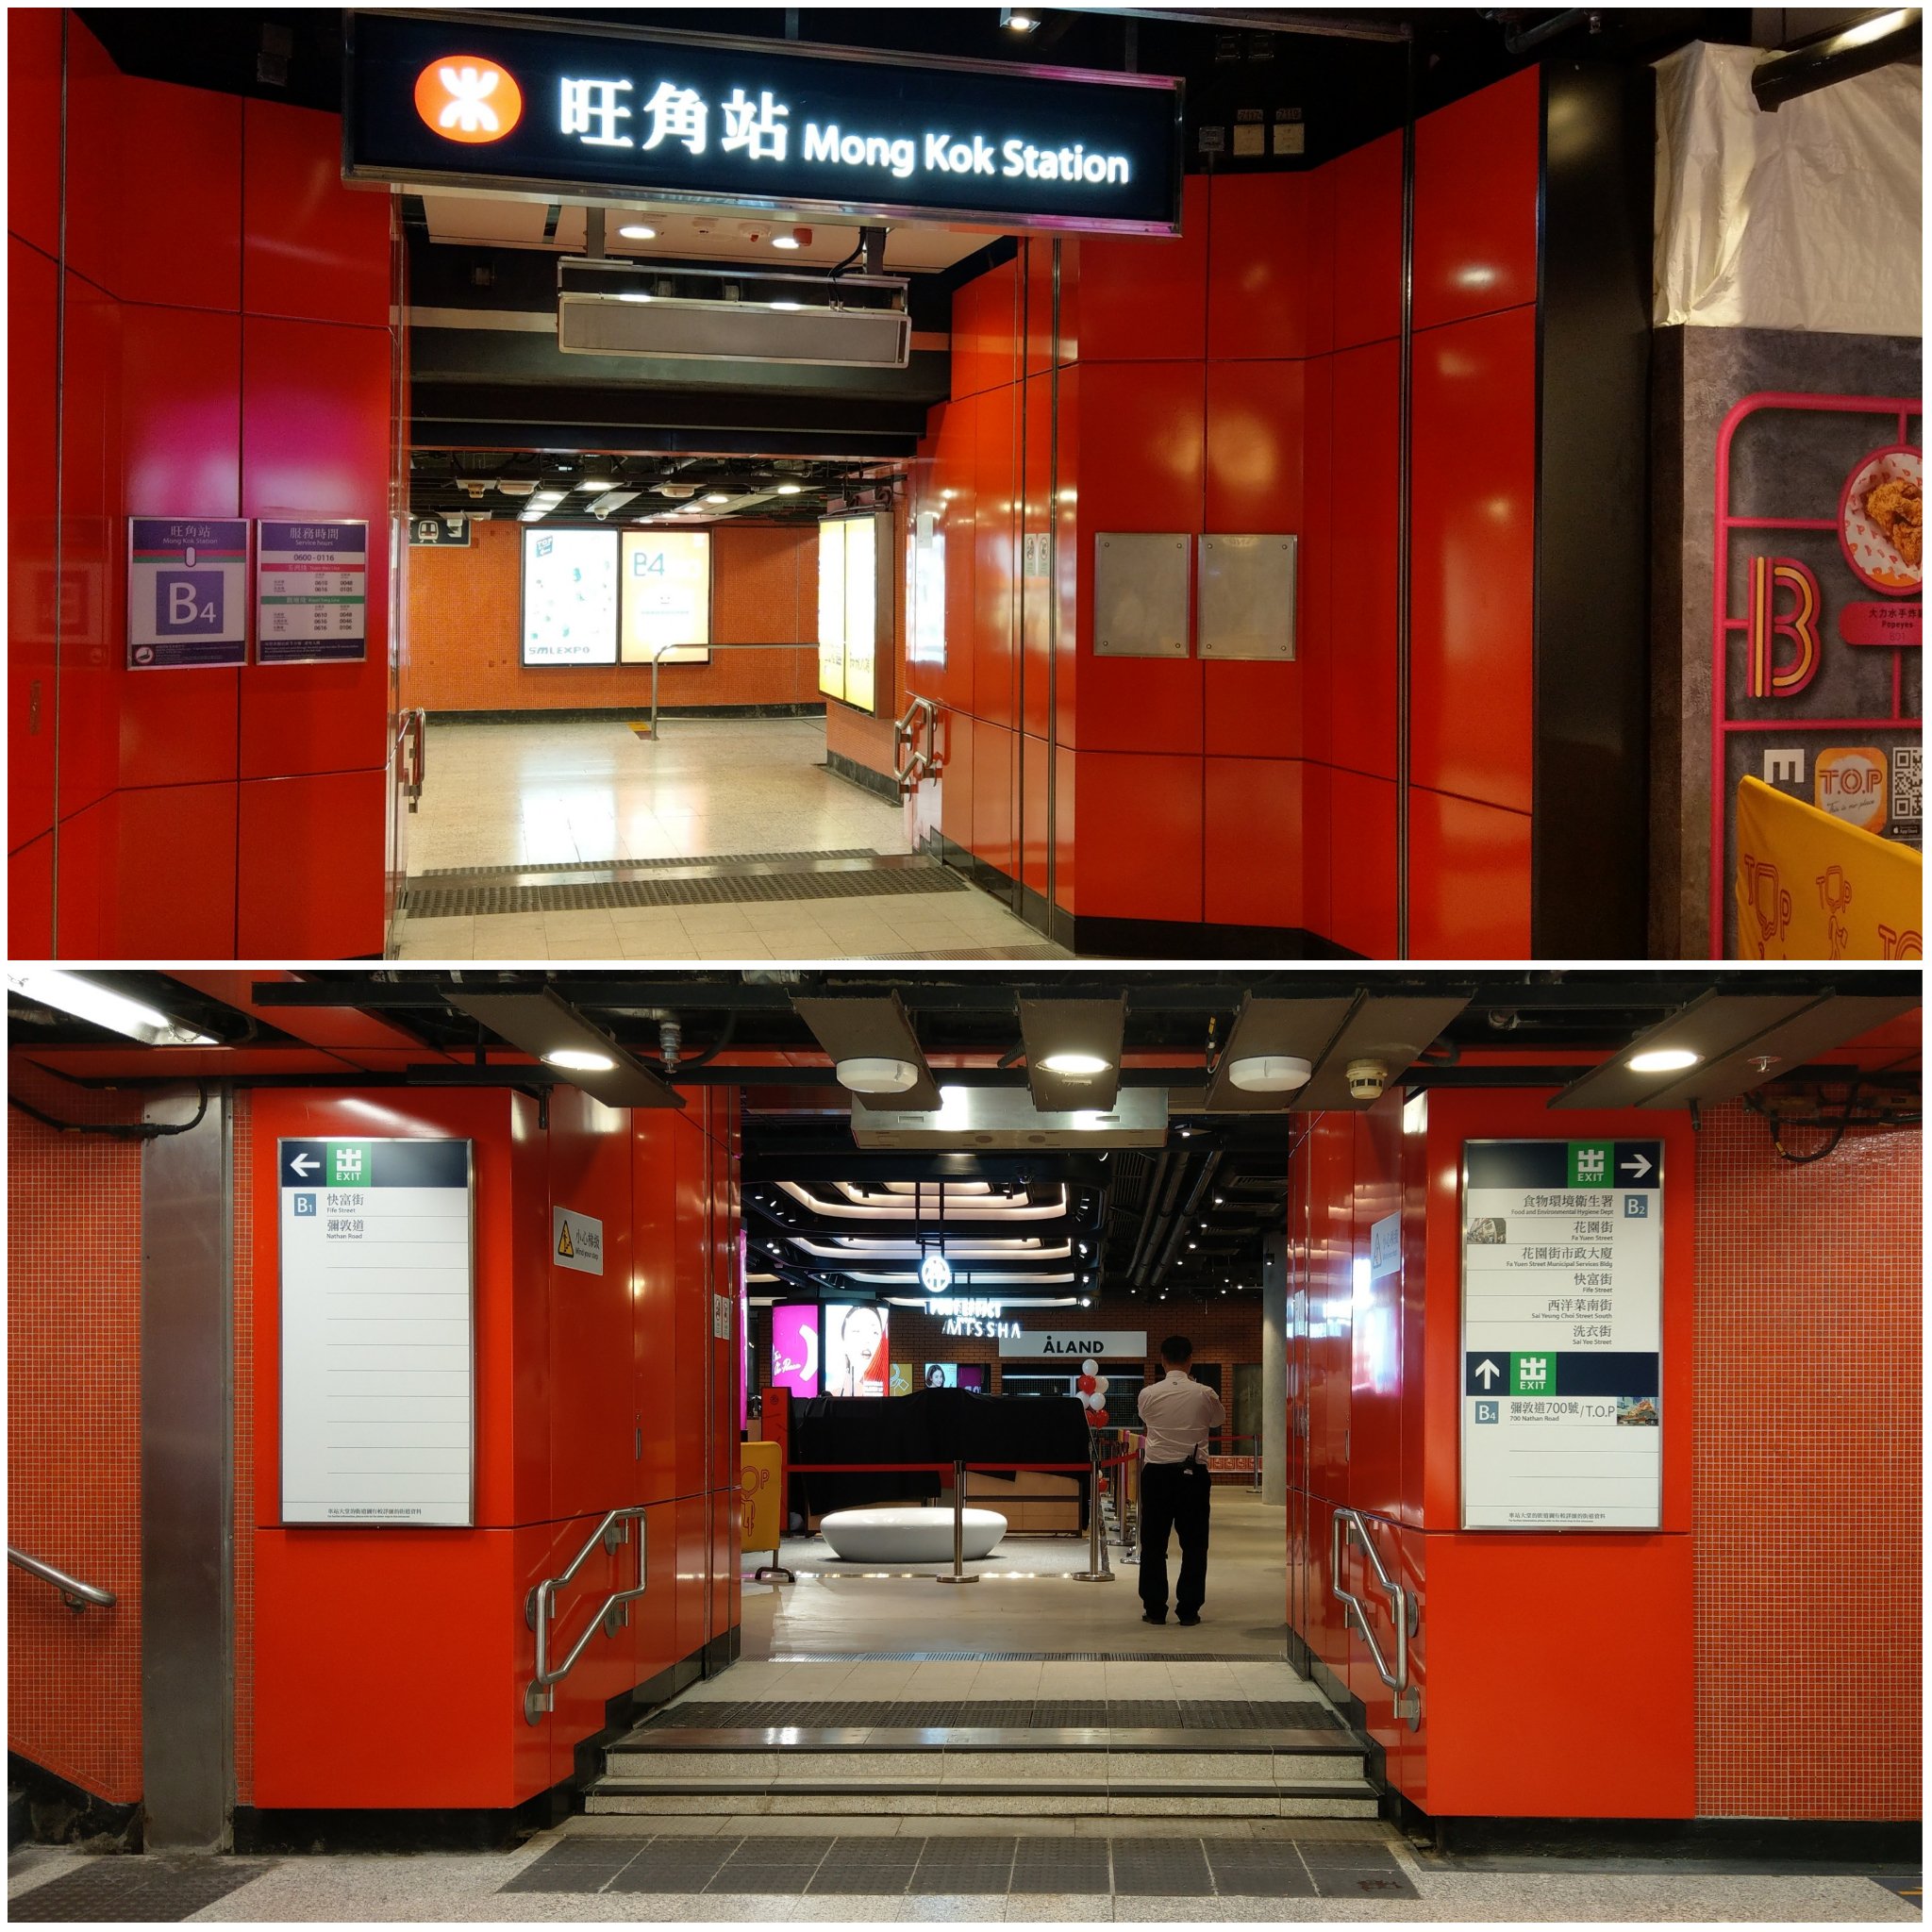 MTR Service Update on Twitter: "Mong Kok Station Exit B4 - 700 Nathan Road is now opened for an easier access through escalators to T.O.P. This is Our Place shopping mall